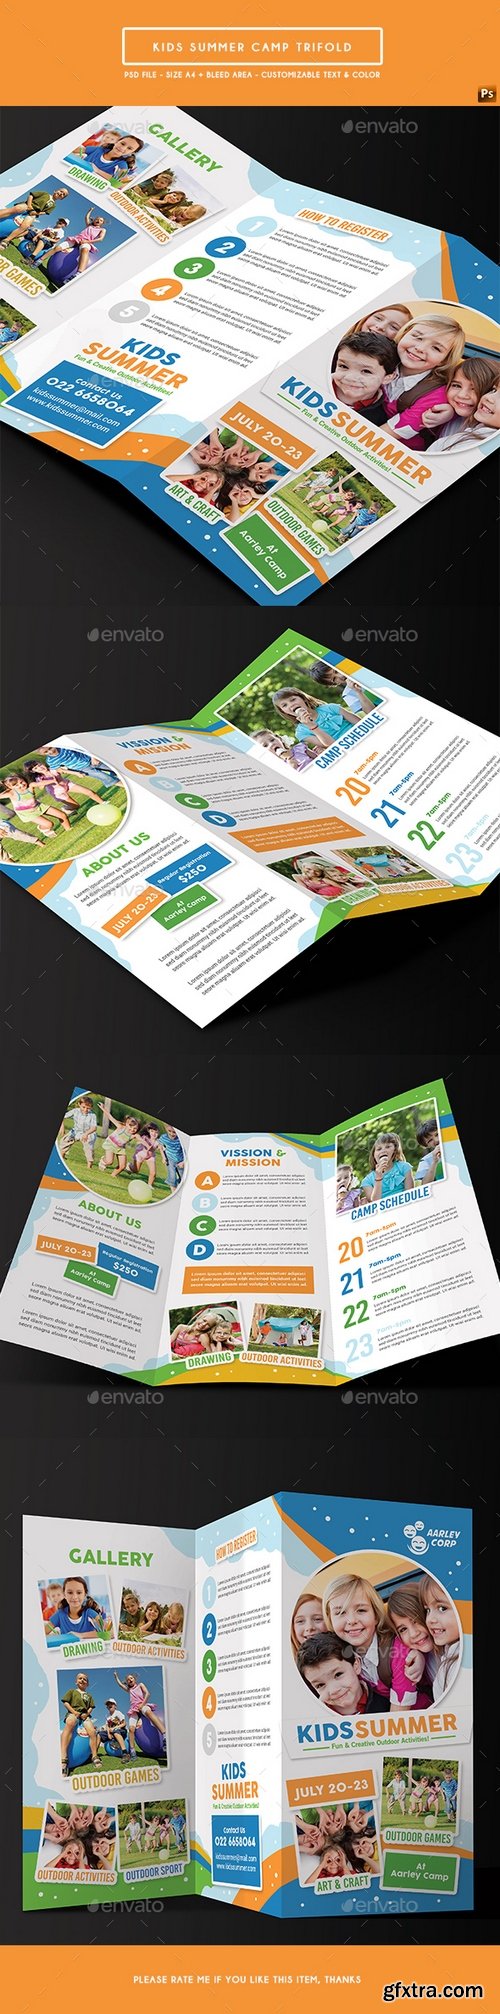 Graphicriver - Kids Summer Camp Trifold 19559091